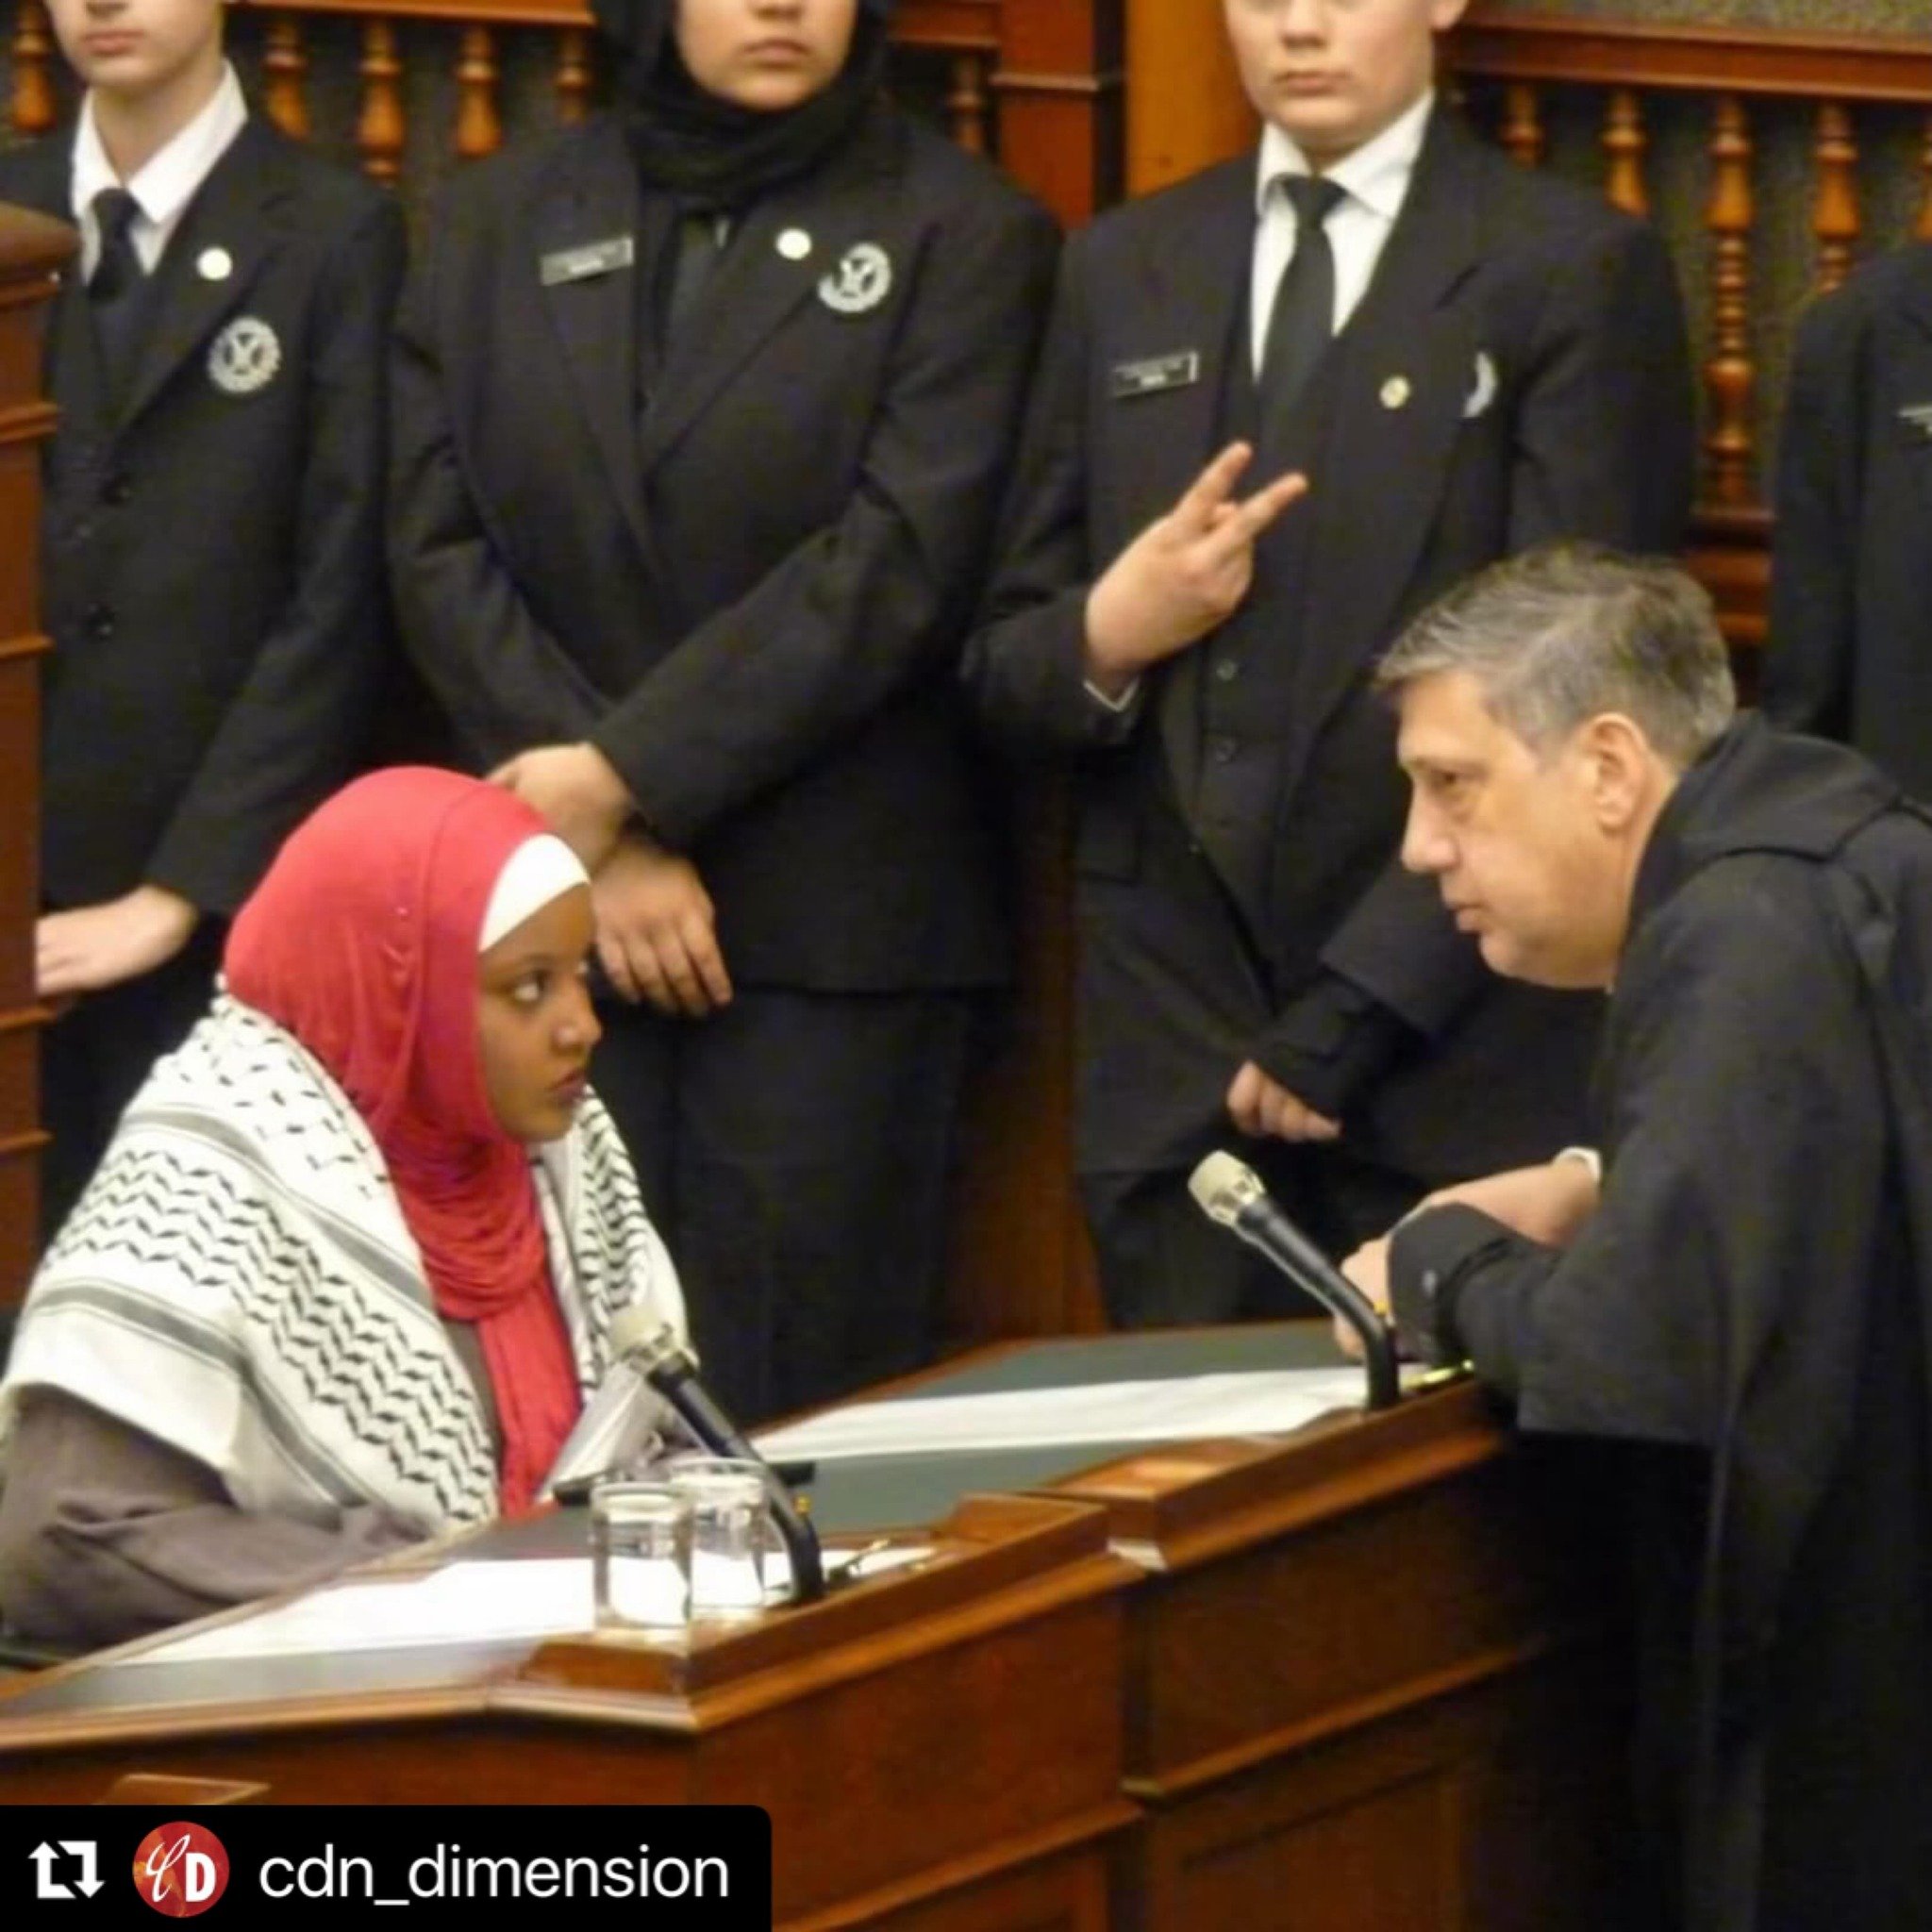 #Repost @cdn_dimension 
・・・
When Ontario MPP Sarah Jama issued a statement in defence of Palestinians and against the occupation, Israel&rsquo;s ongoing apartheid and brutal siege of Gaza, the first thing her party did was to sanction her and ask for